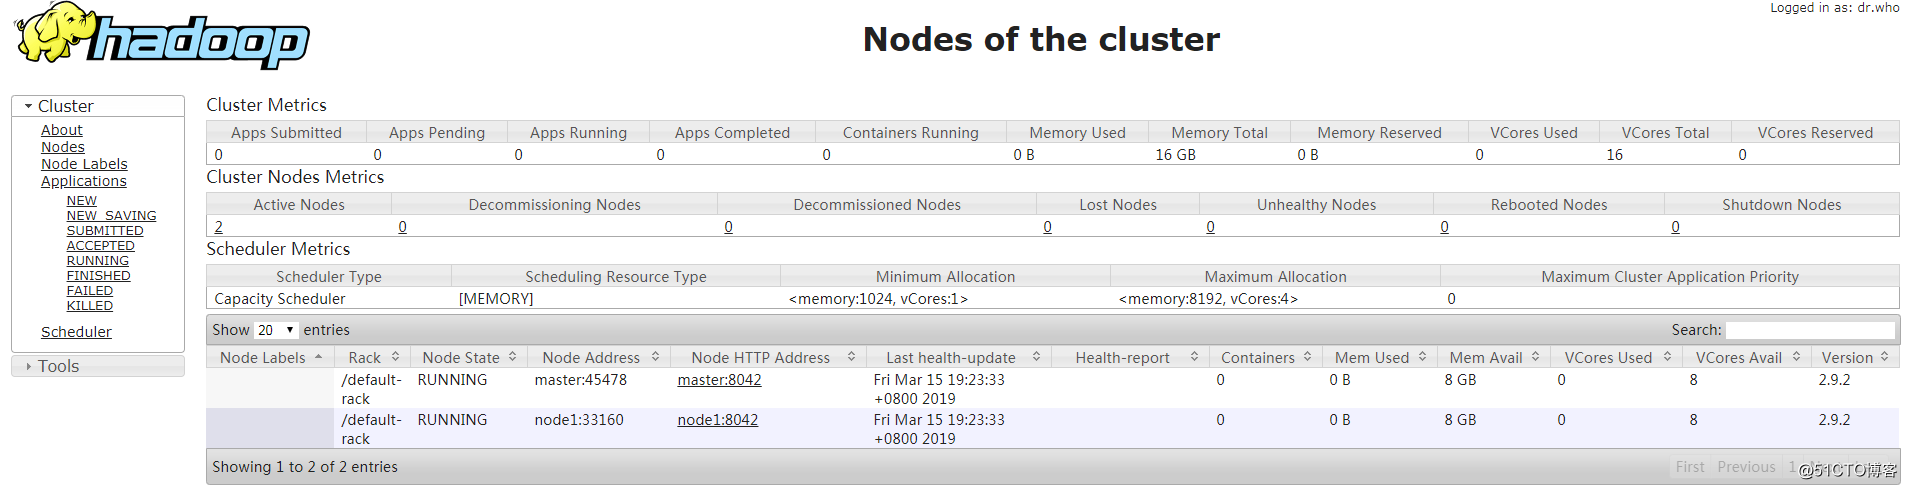 hadoop 2.9.2 fully distributed installation